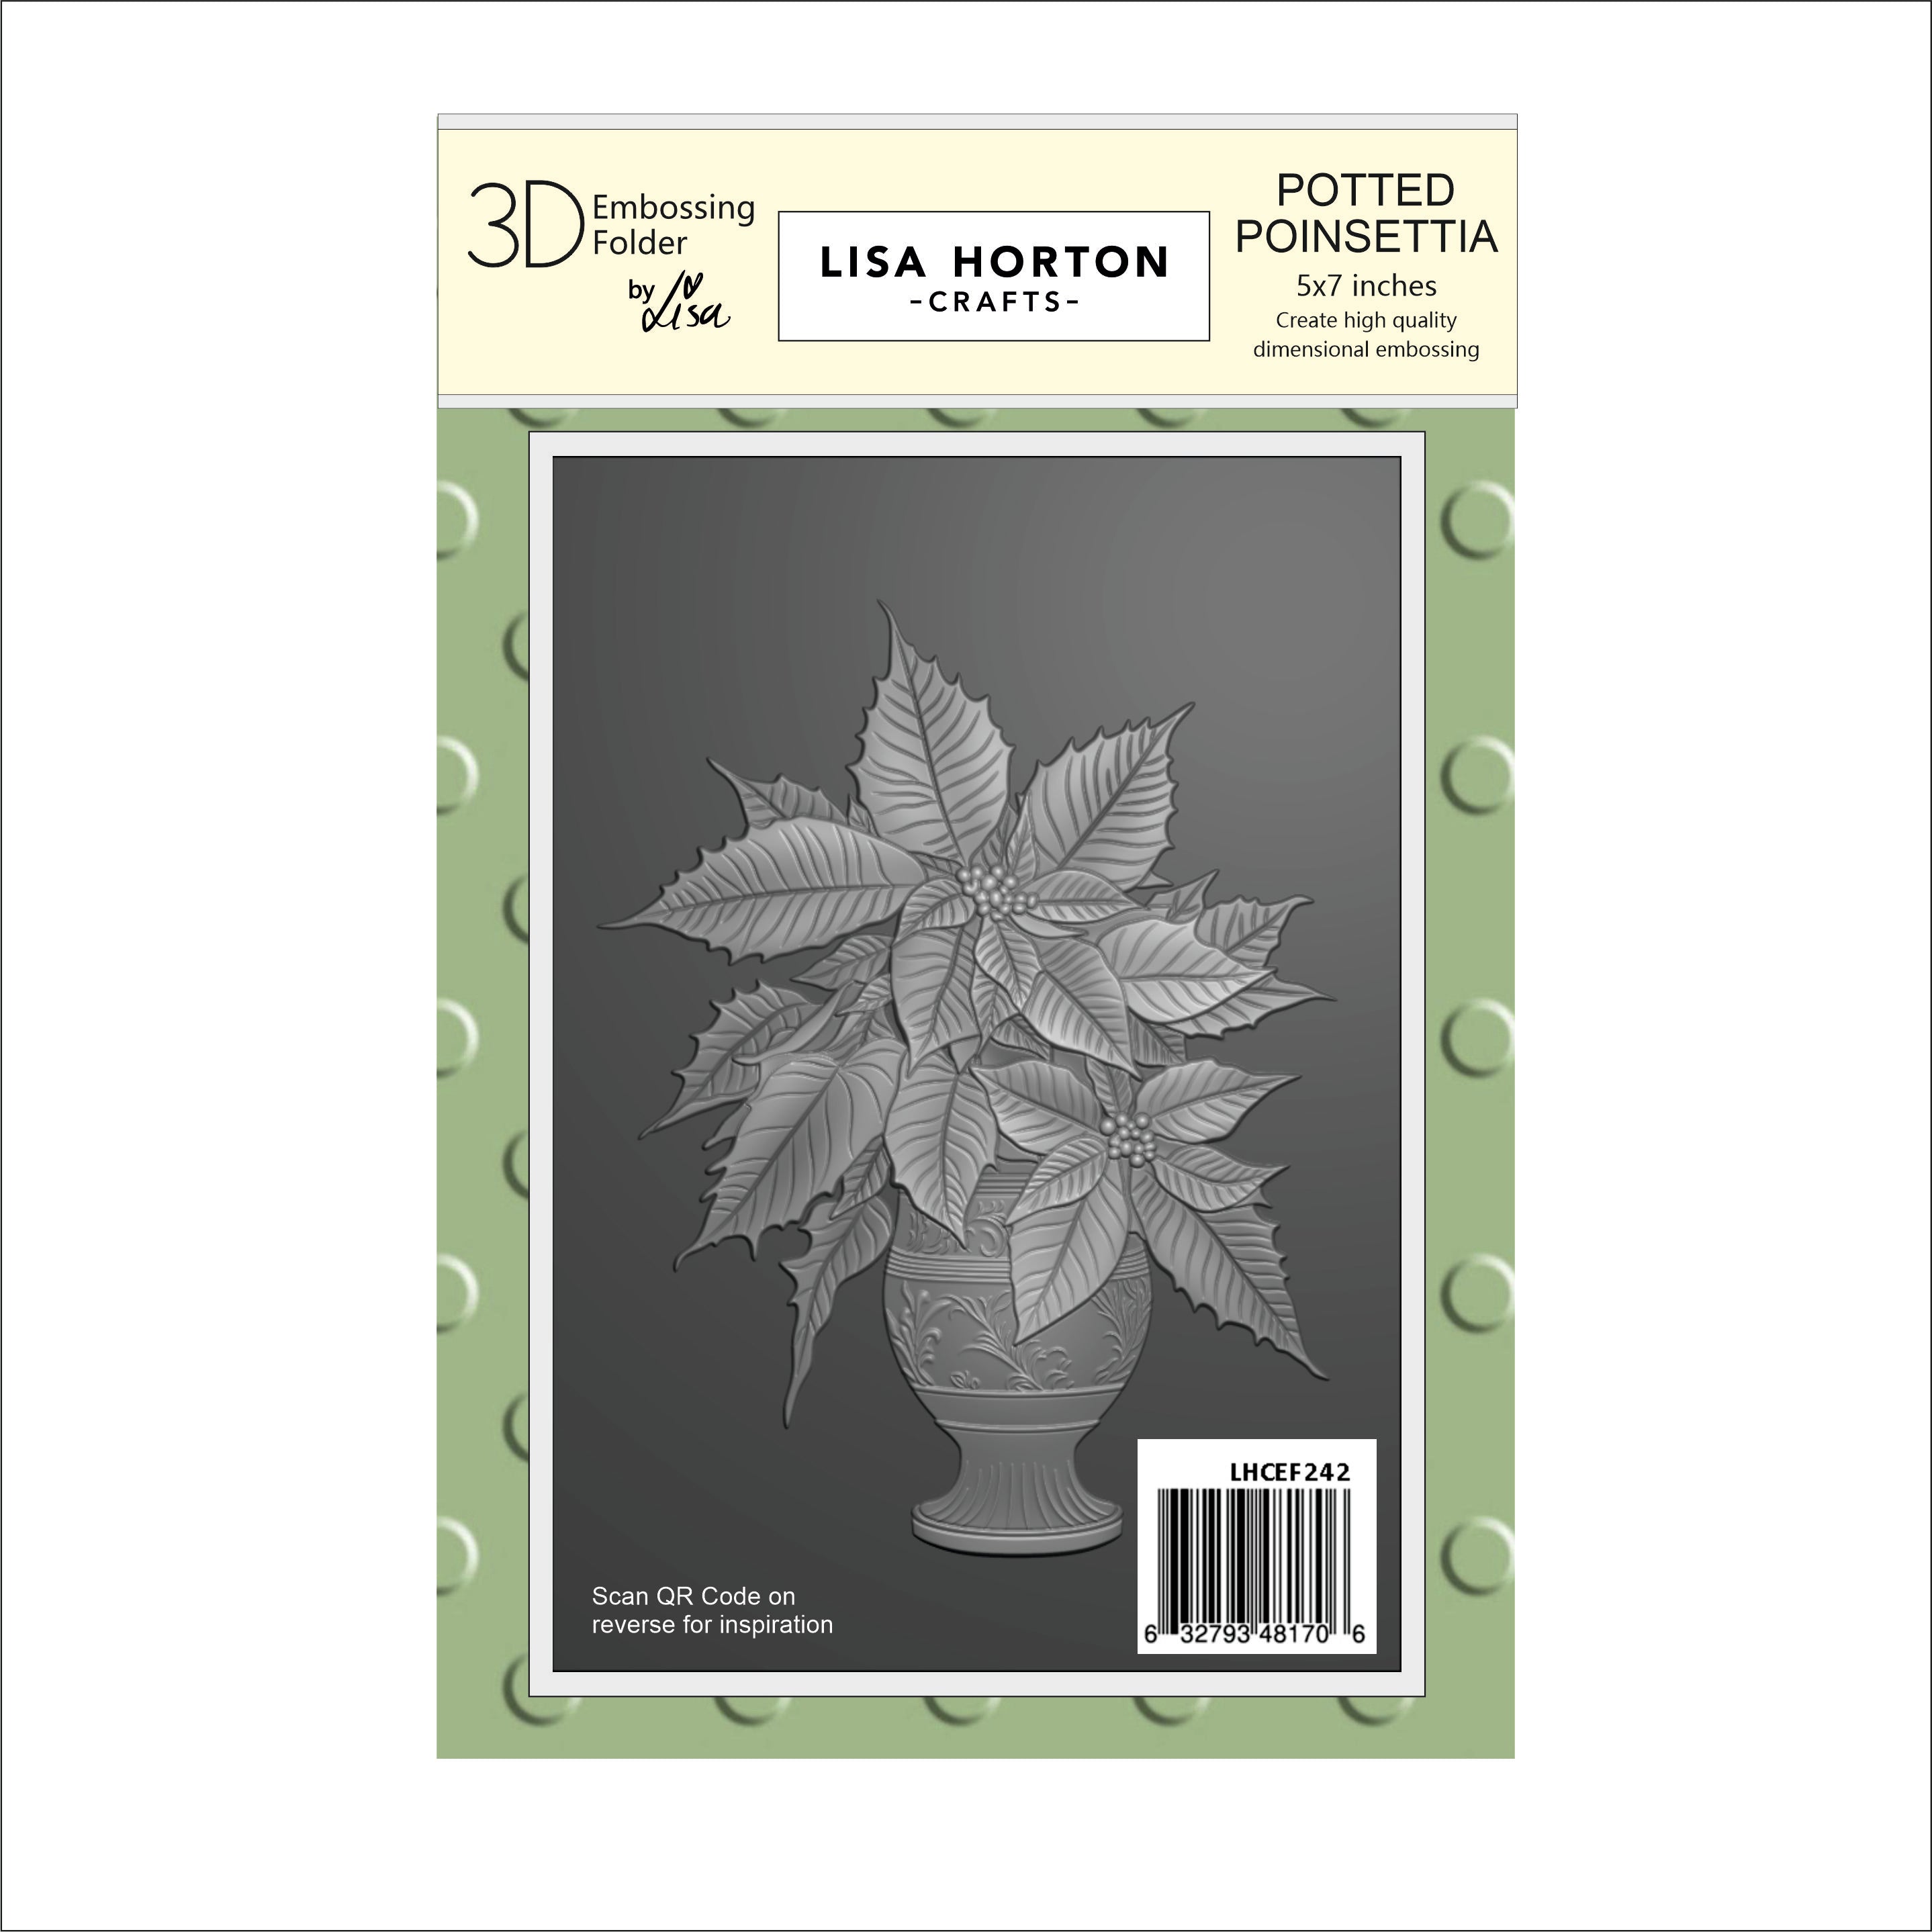 Lisa Horton Crafts Potted Poinsettia 5" x 7" Embossing Folder